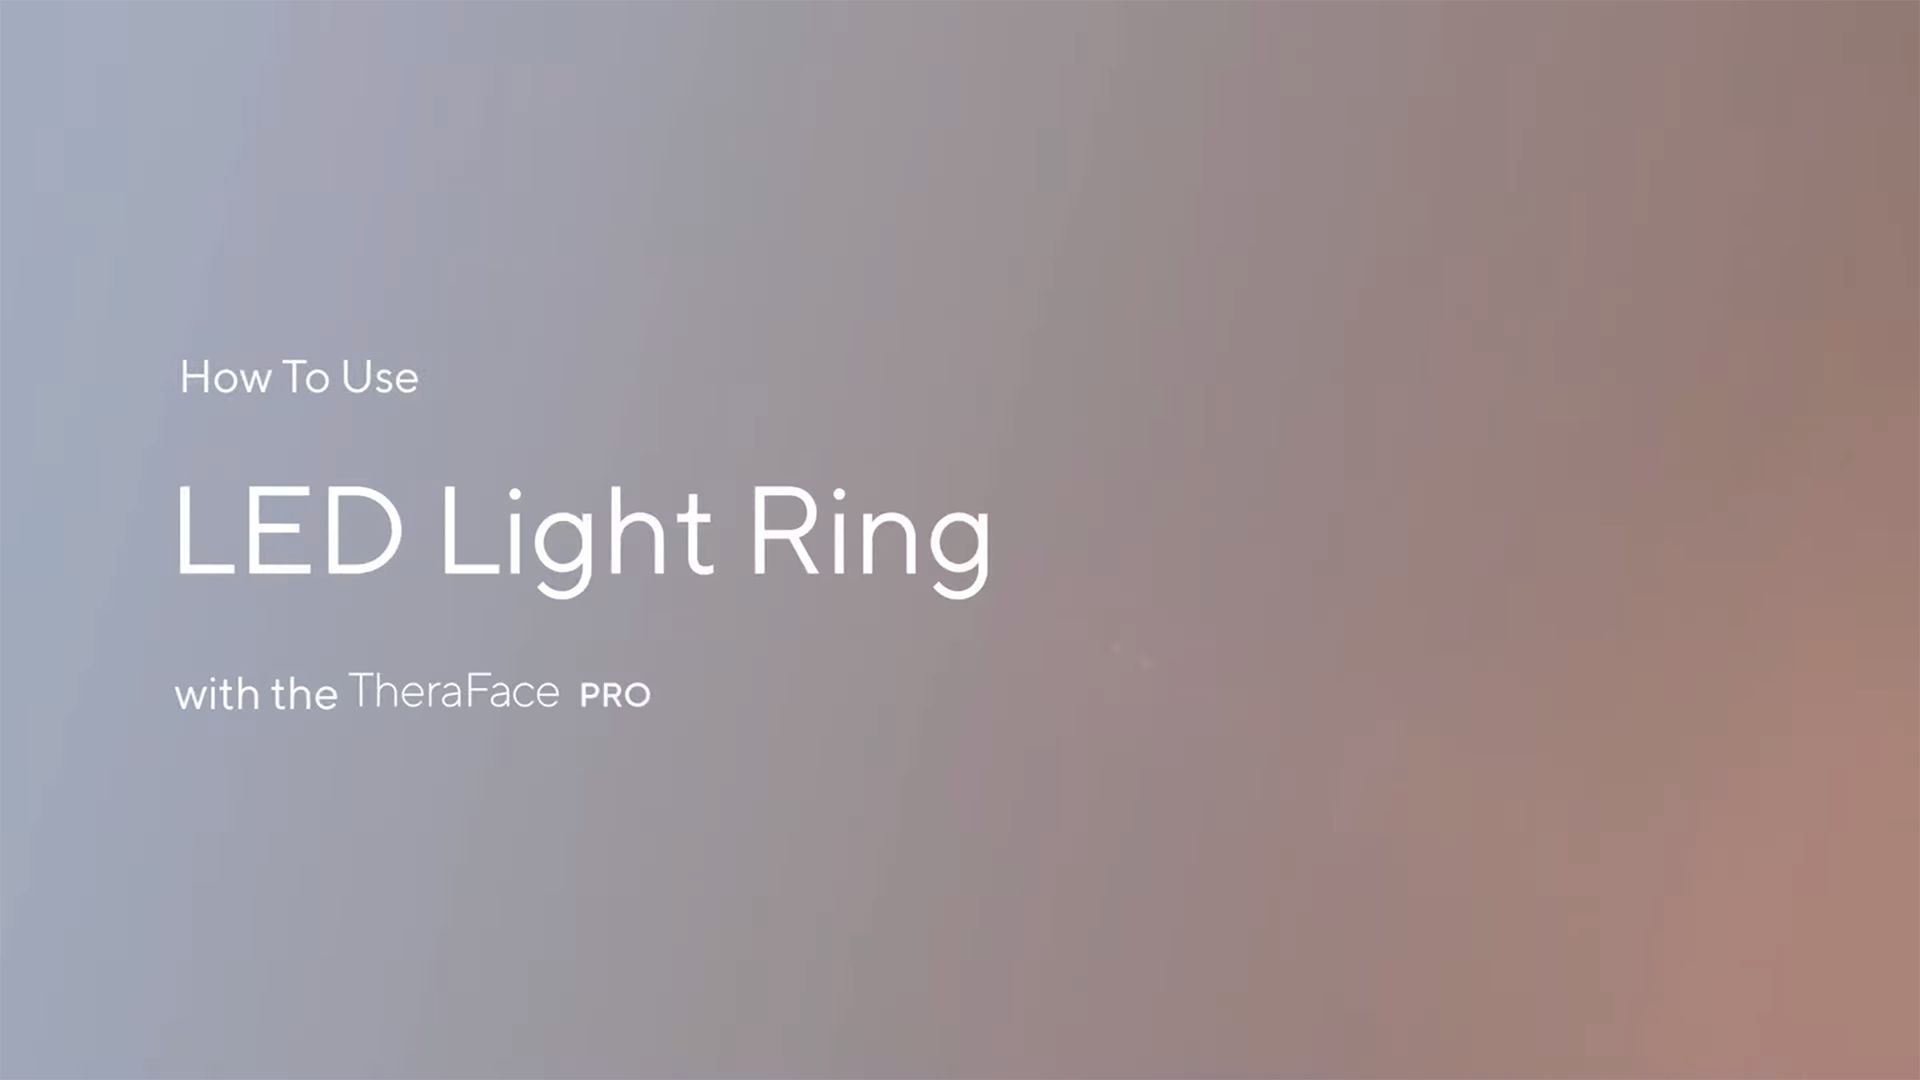 How To: TheraFace PRO LED Light Rings